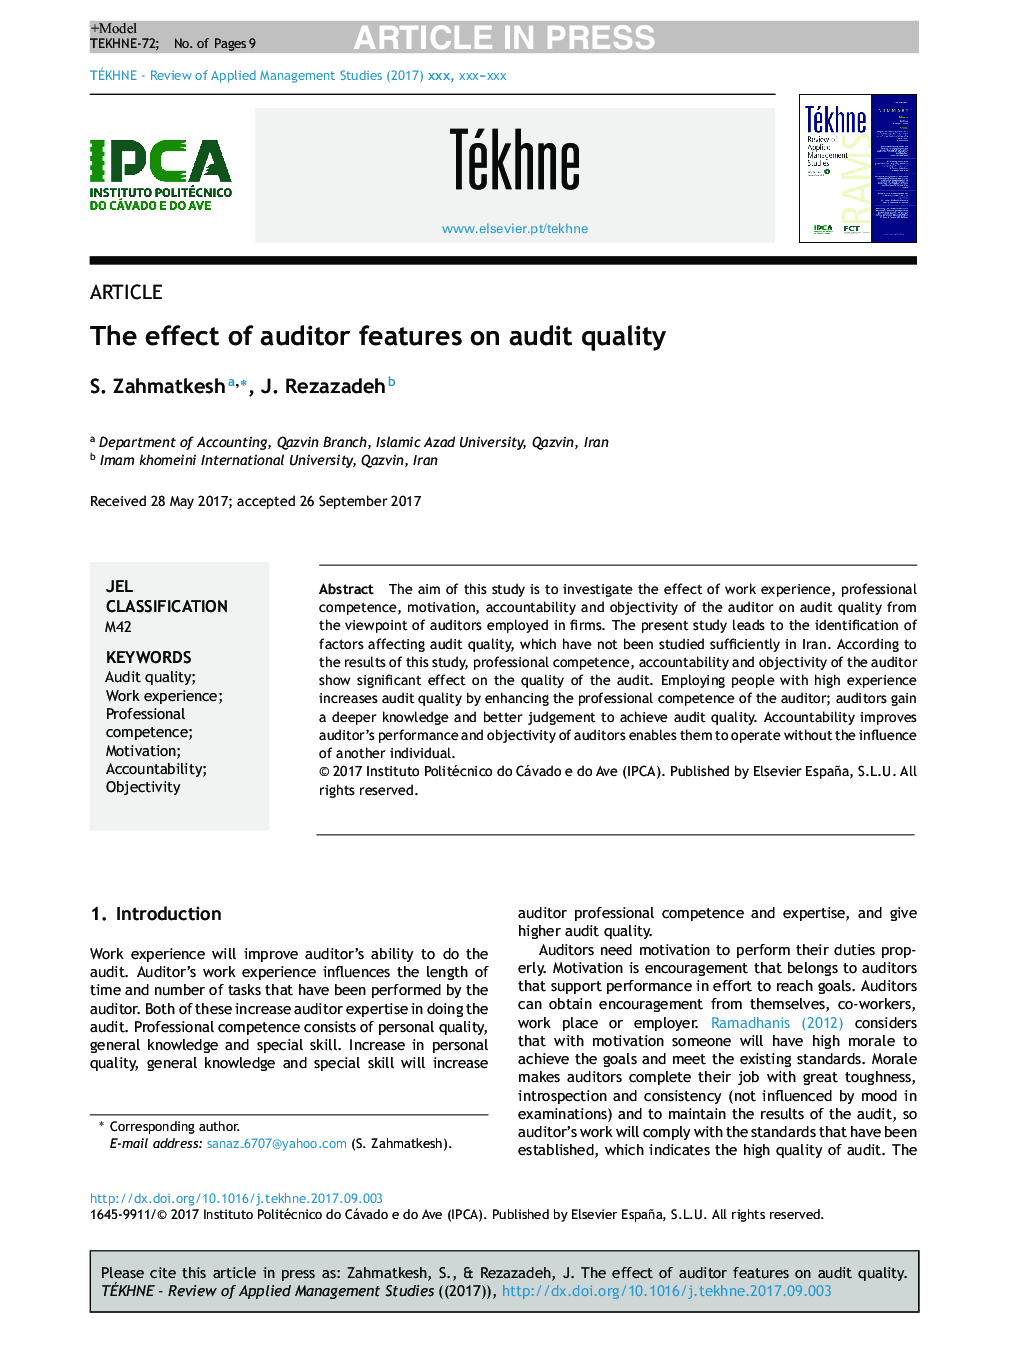 The effect of auditor features on audit quality